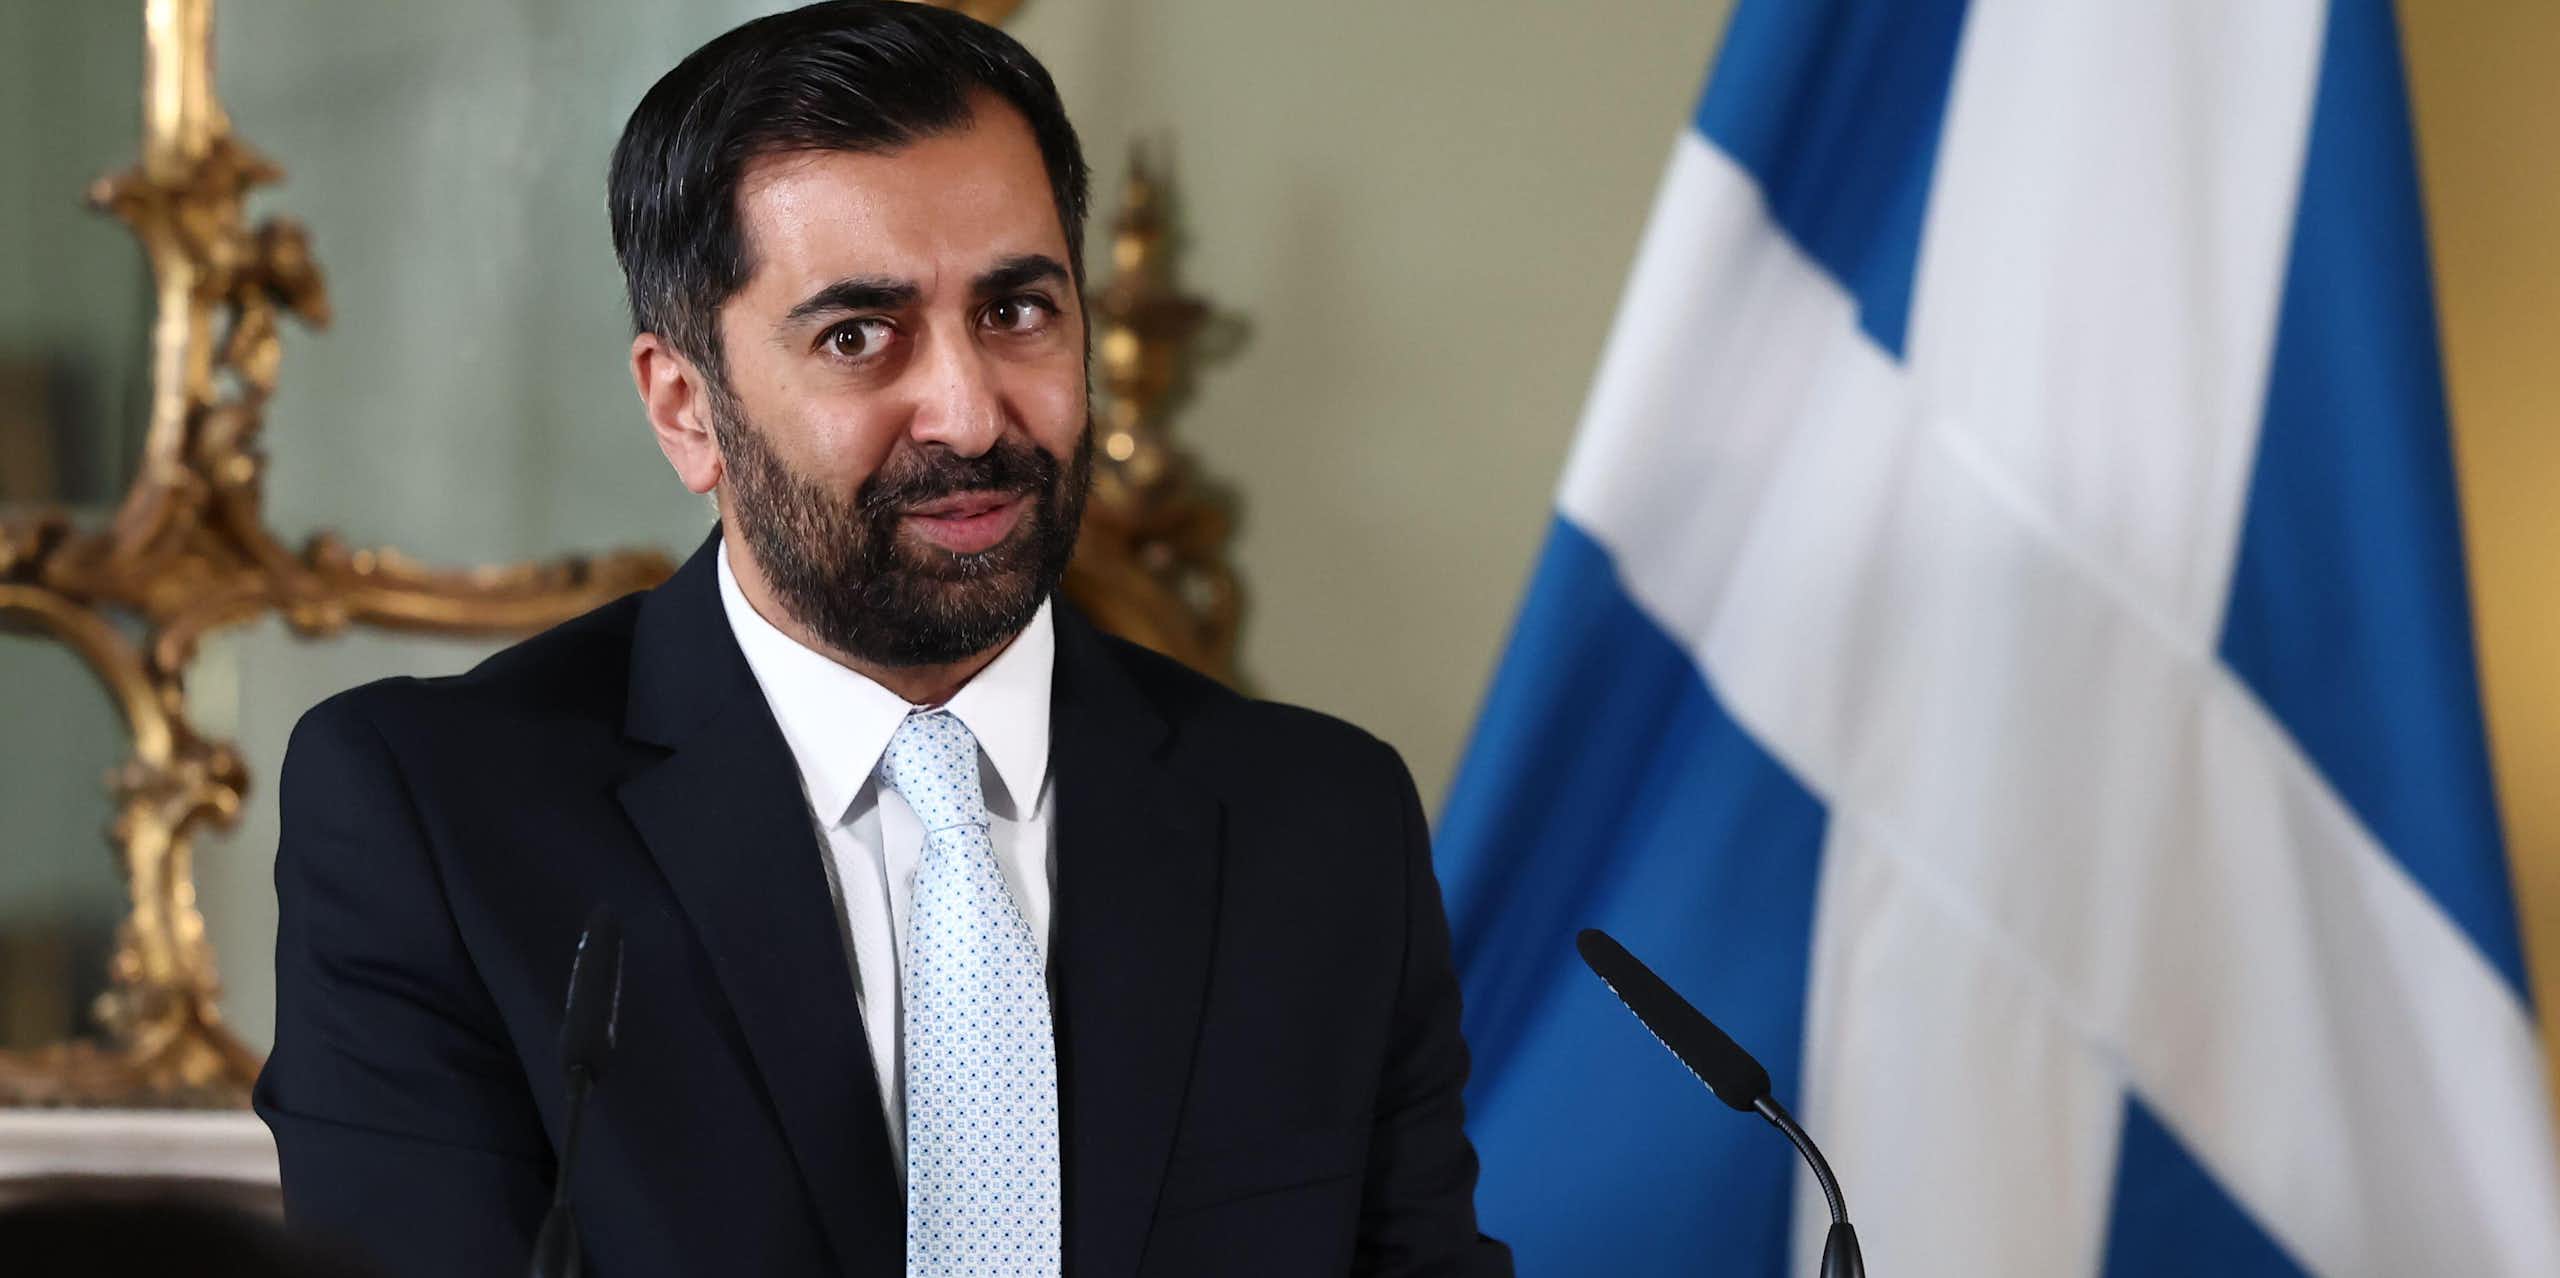 Humza Yousaf giving a speech in front of a Scottish flag. 